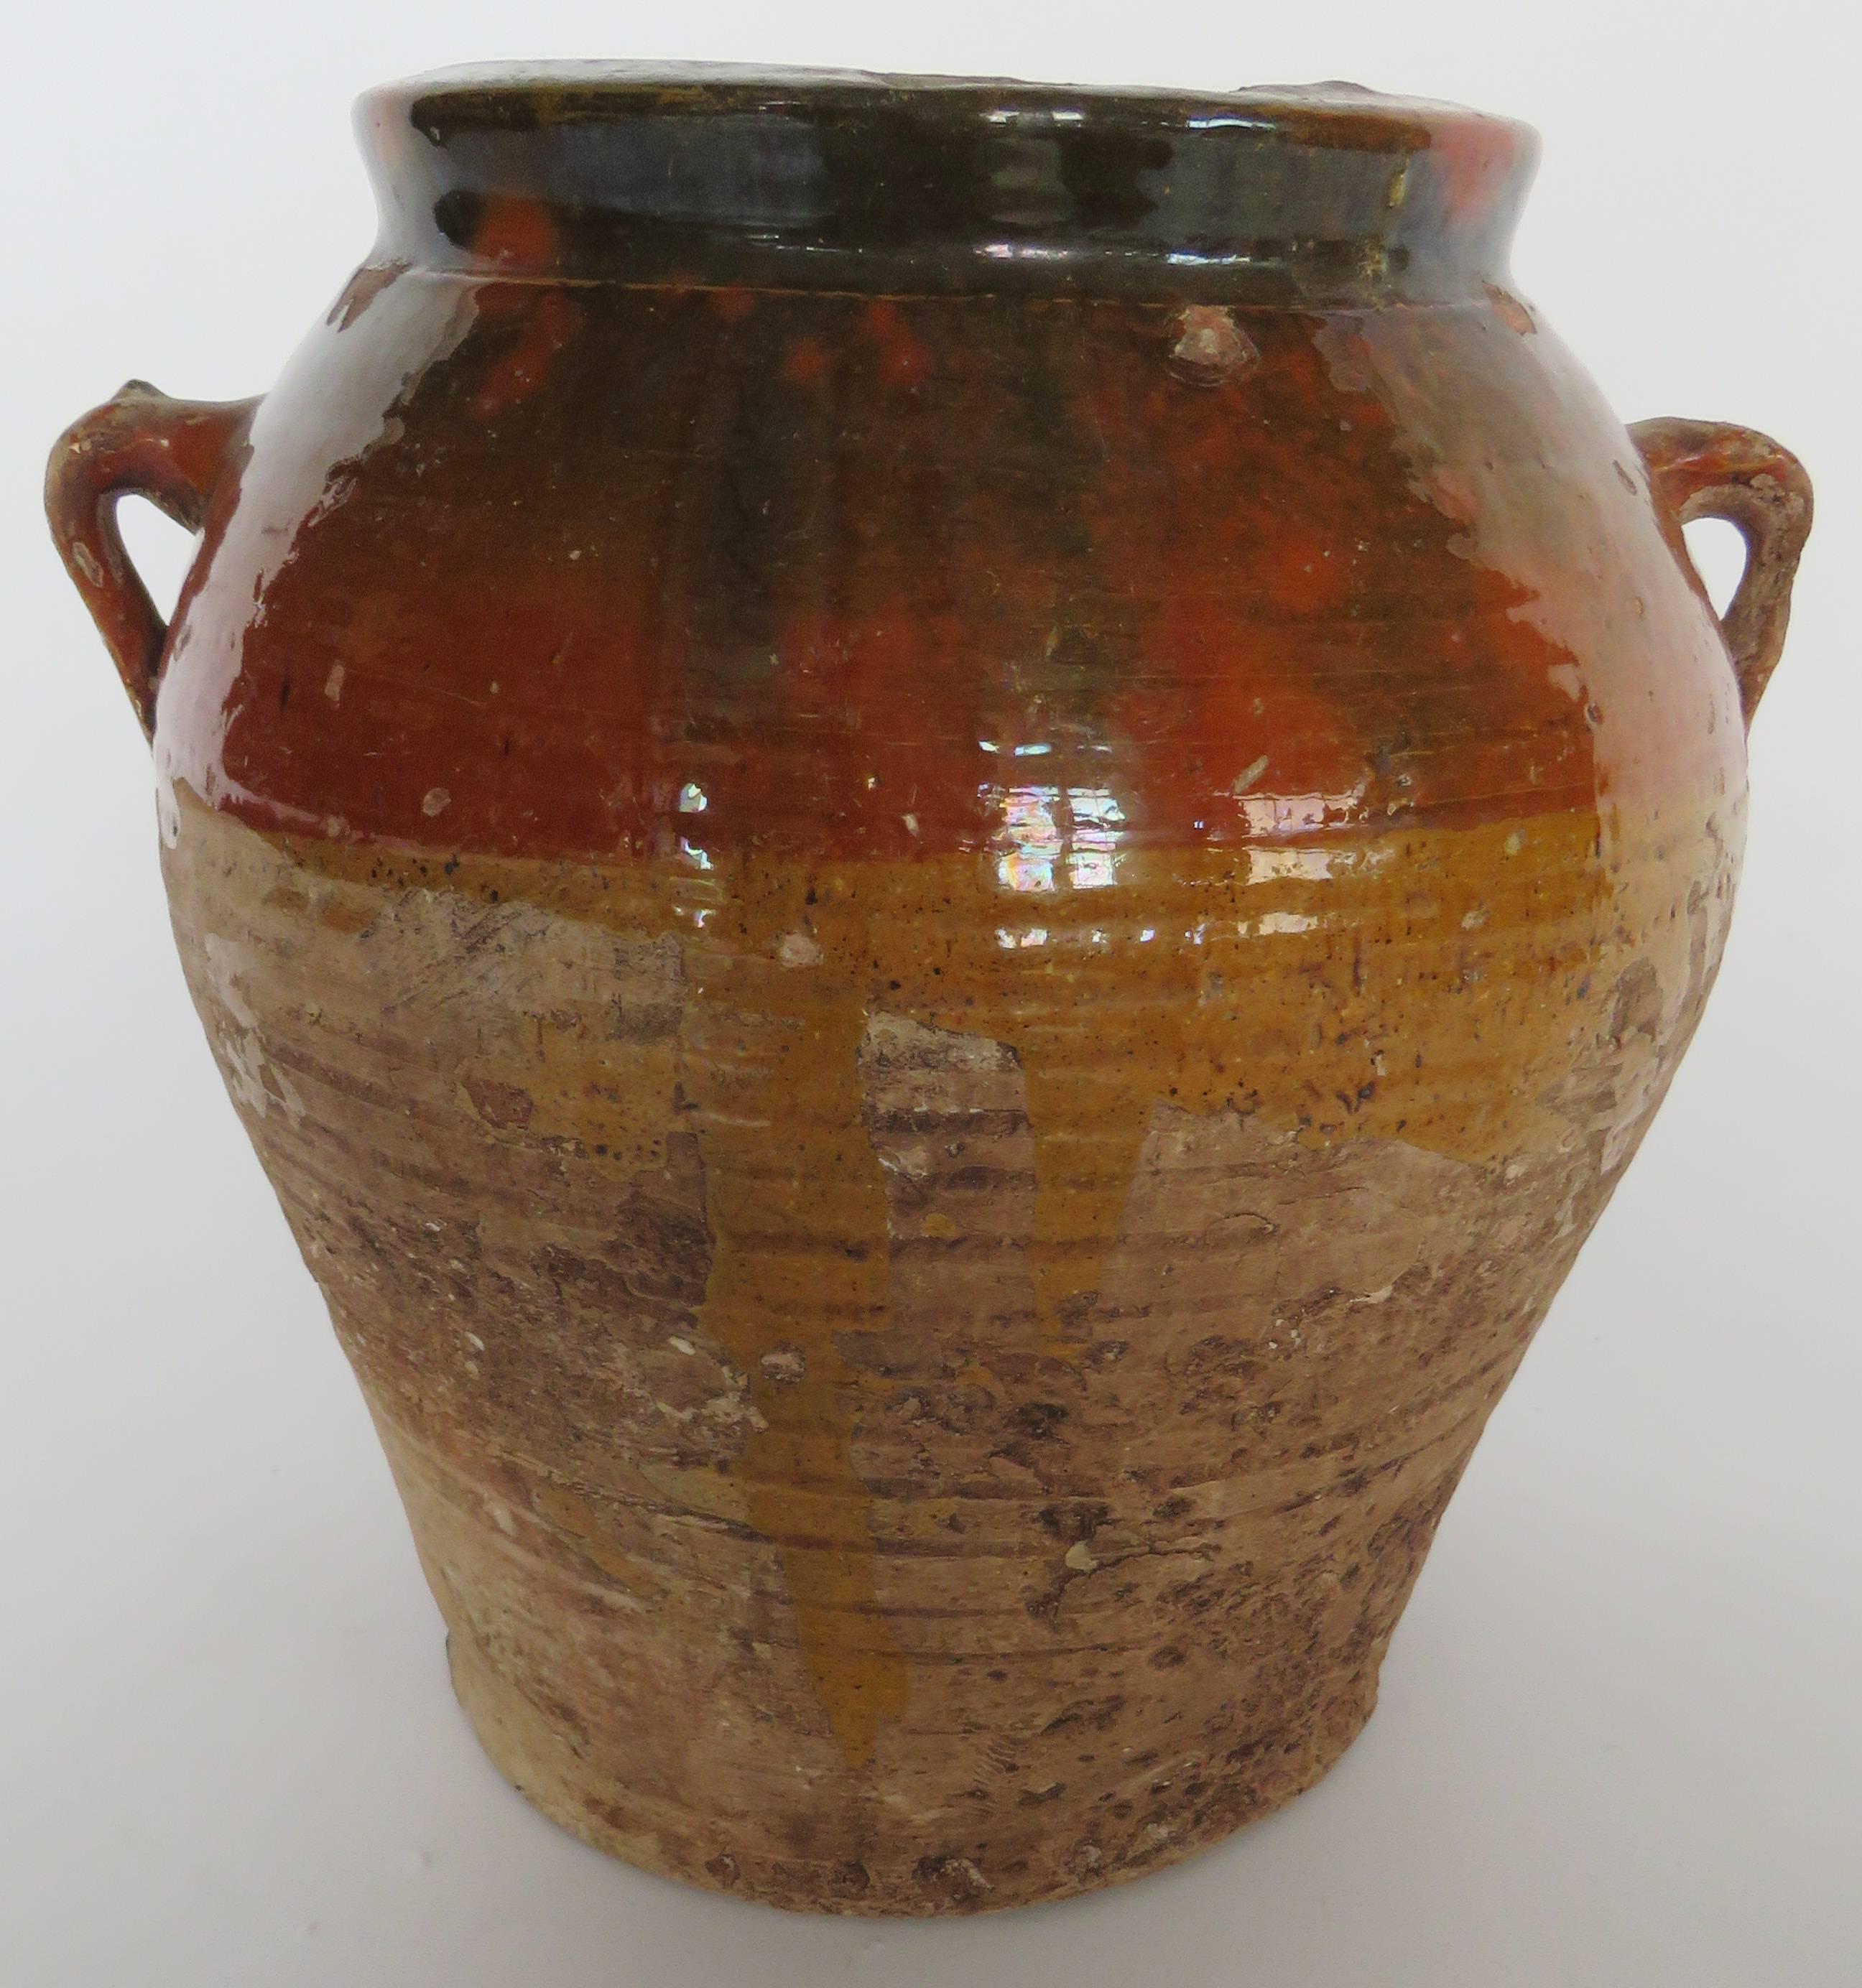 Hand coiled ribbed pot with two handles decorated with forest green, rust orange and mustard yellow drippy glaze around neck.

Shipping costs per item diminish with purchases of additional items. 
Photo of collection of pots it is to show more